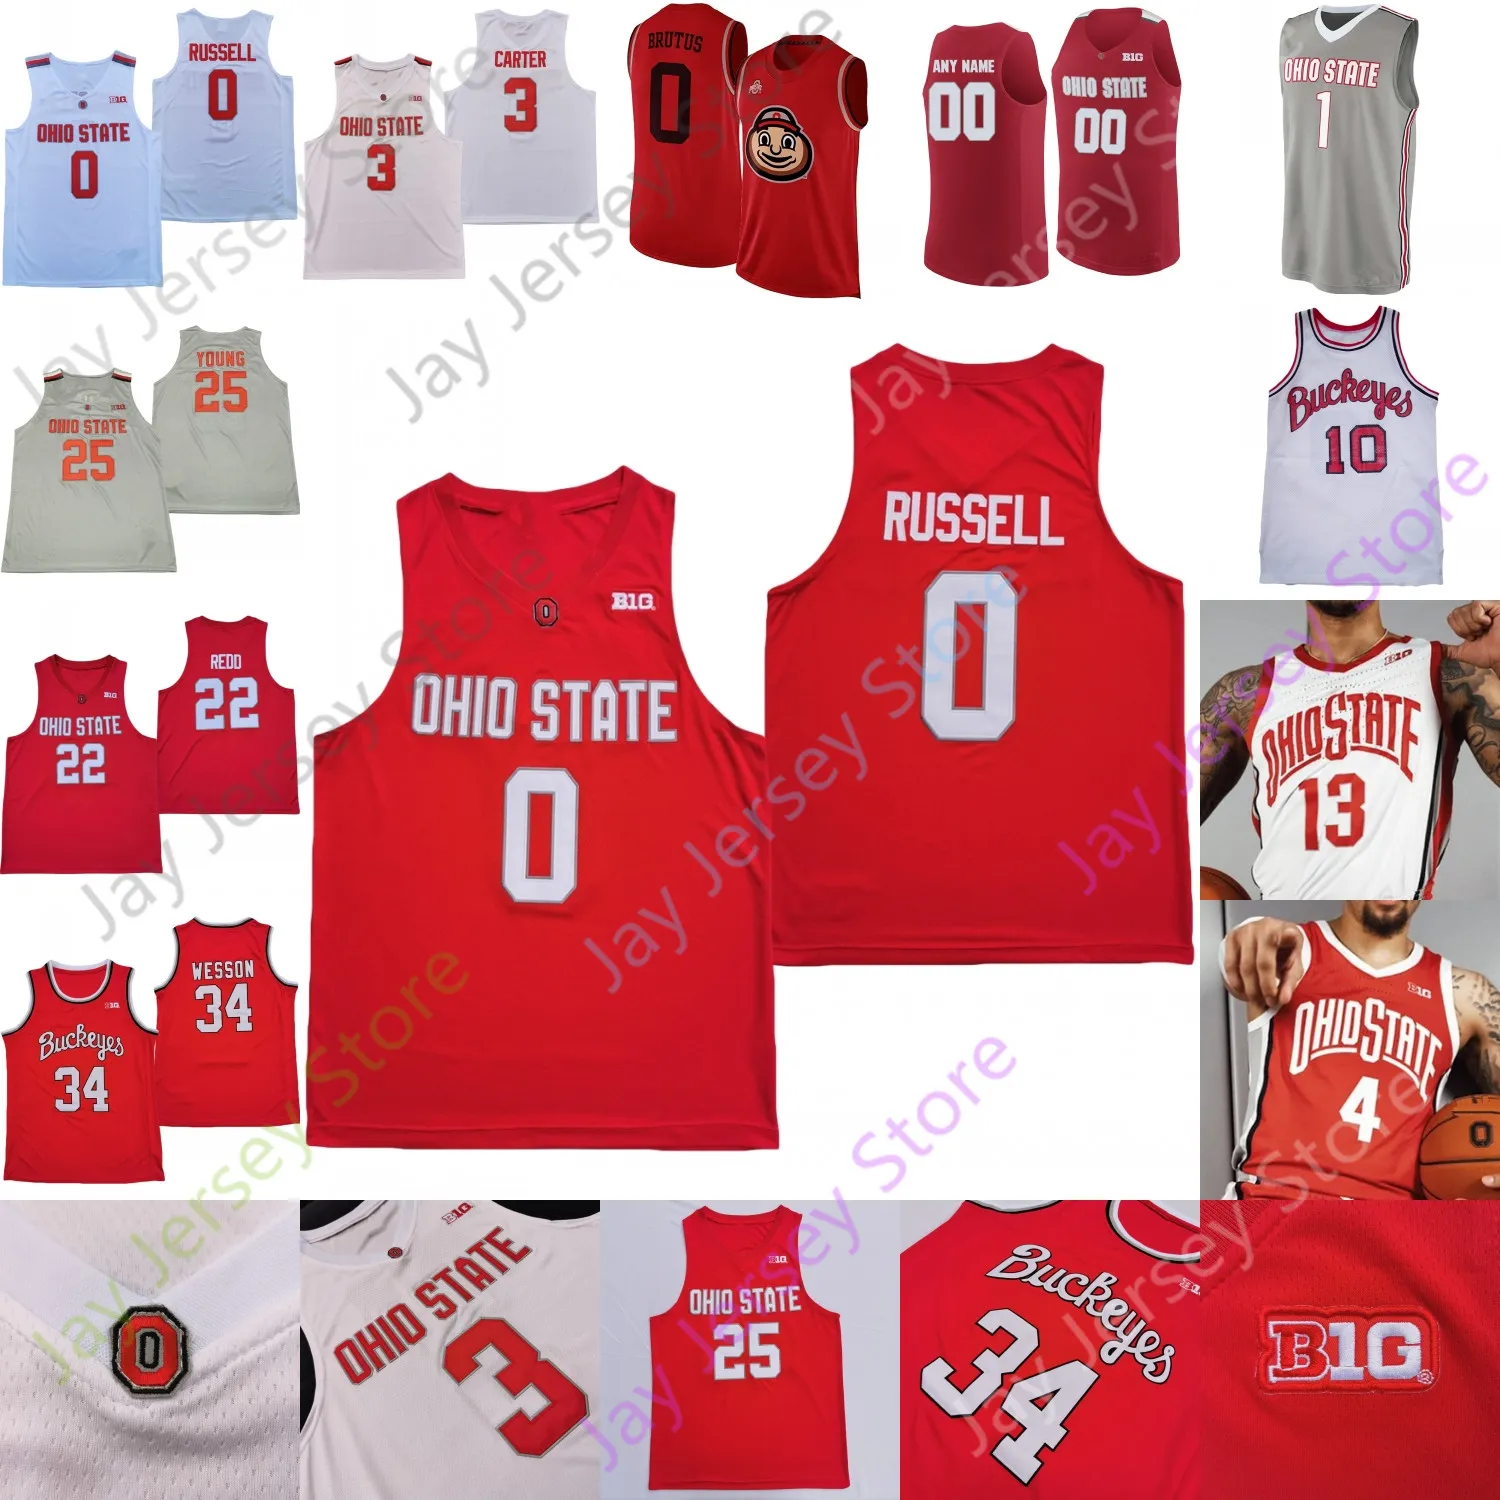 Ohio State Buckeyes Jersey Basketball NCAA College E.J. Liddell Eugene Brown III Zed Key Seth Villes Musa Jallow Sueing Ahrens Diallo Russell